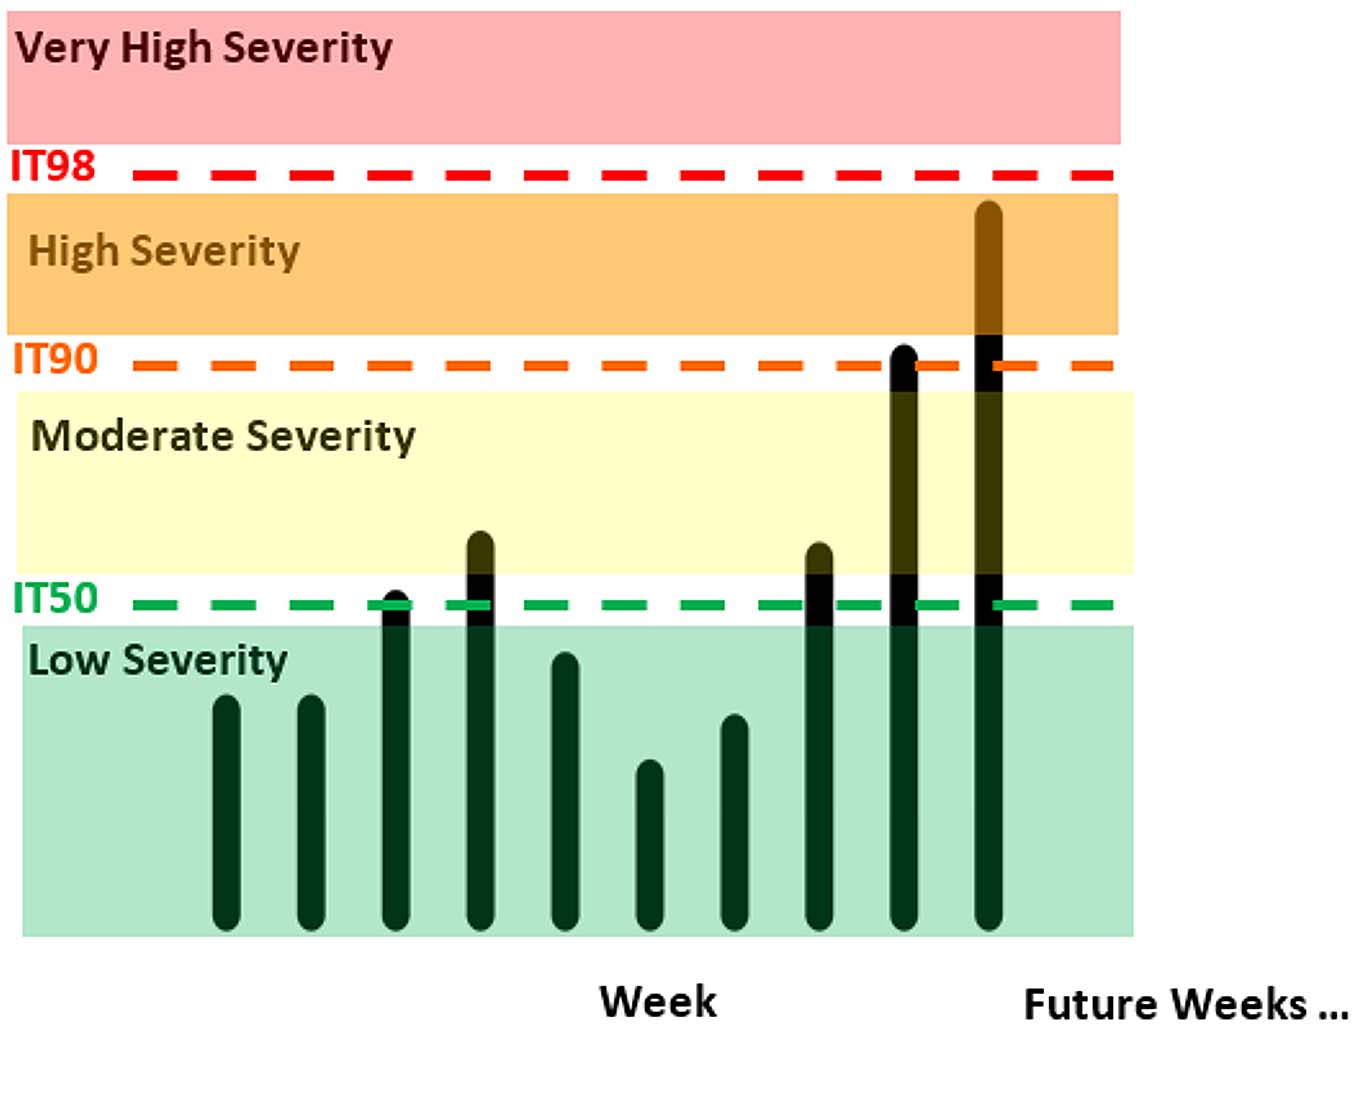 researchers classify severity with the terms Very High Severity, High Severity, Moderate Severity, and Low Severity